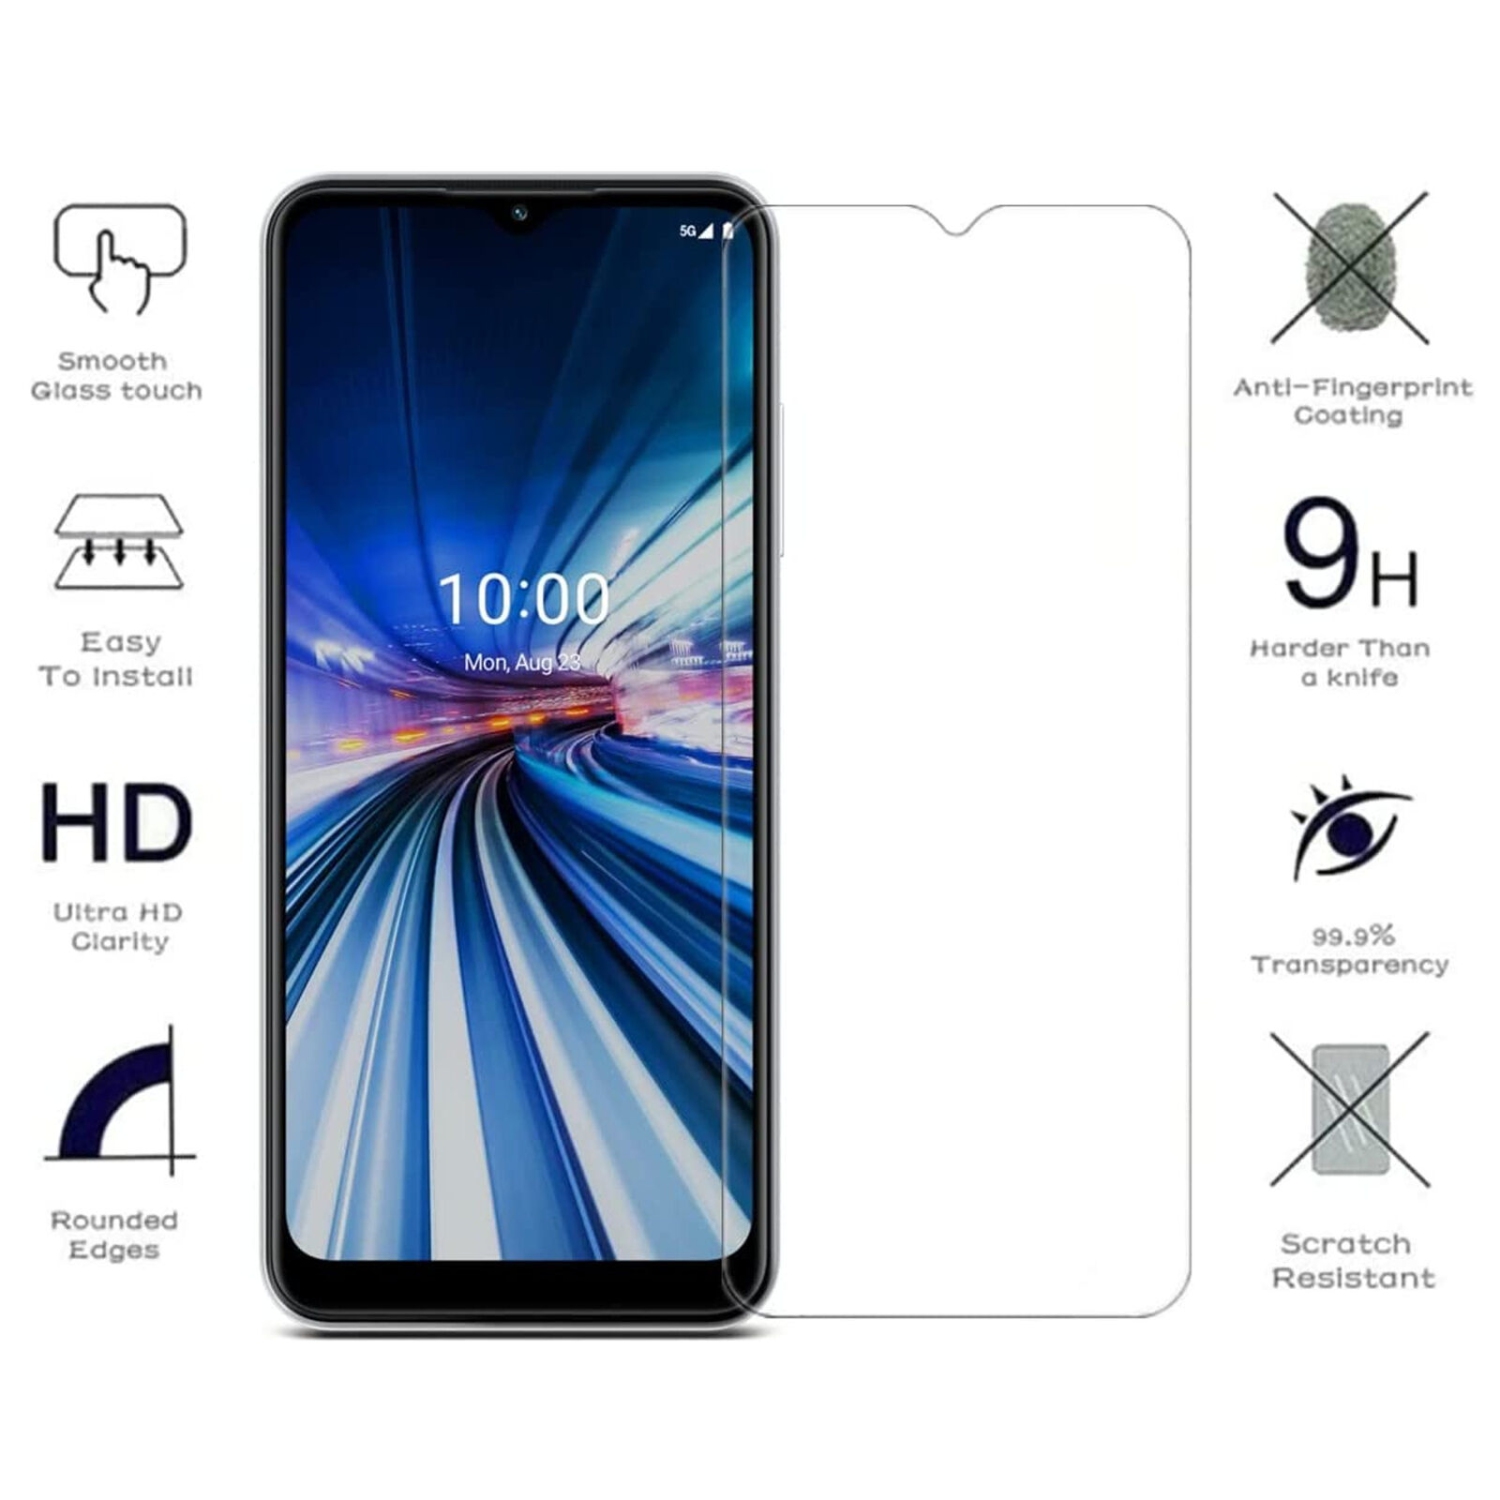 【2 Packs】 CSmart Premium Tempered Glass Screen Protector for Samsung XCover 6 Pro, Case Friendly & Bubble Free